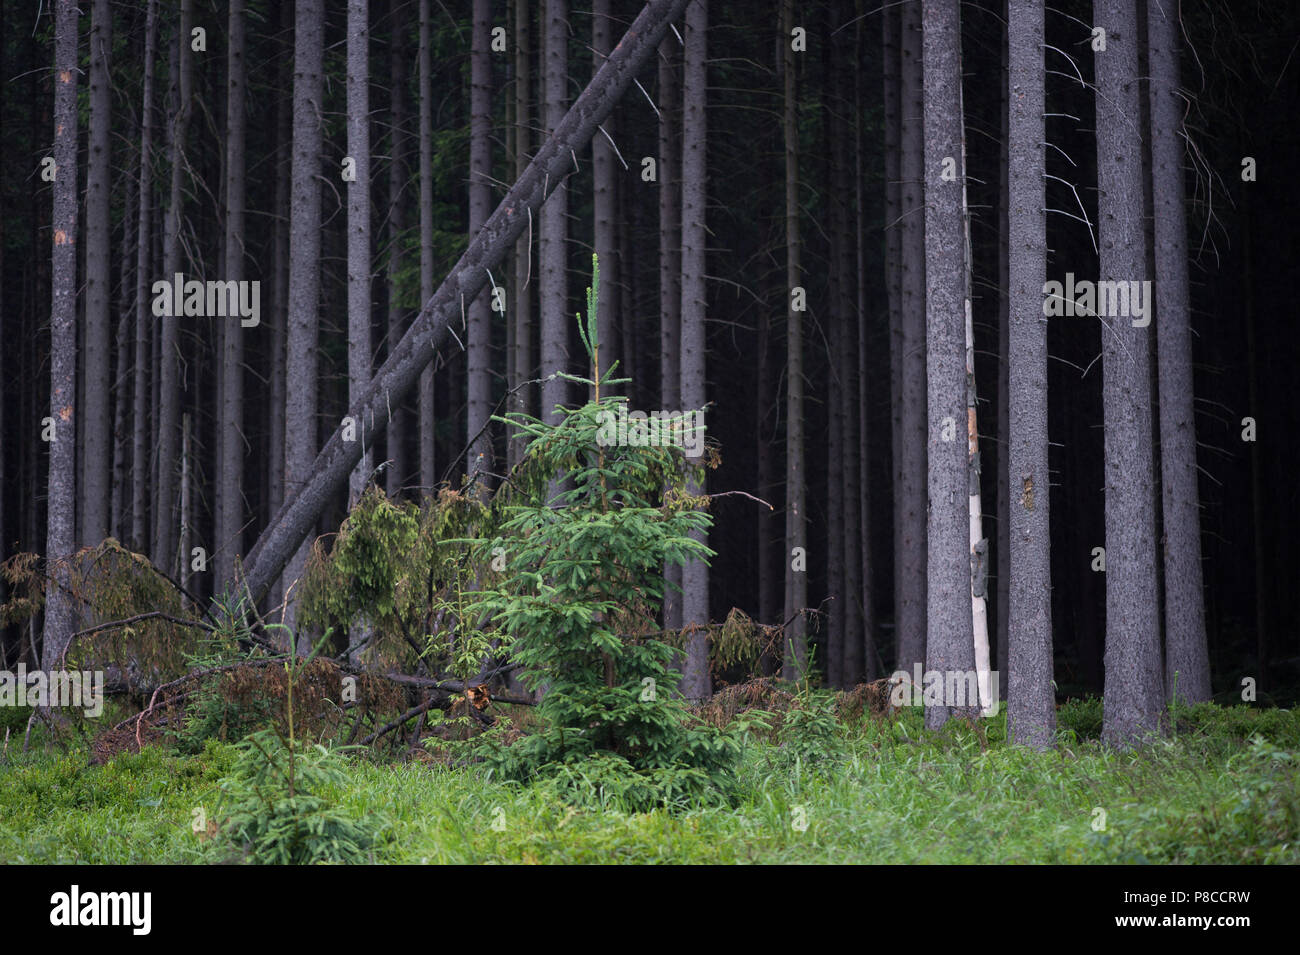 Drei Annen Hohne, Germany. 21st June, 2018. Young spruce trees growing in a forest area damaged by a storm. Heavy storms were raging several months ago over many parts of Germany and caused havoc in the forests. Now bark beetles are setting up residence in the overturned spruce trees. Credit: Klaus-Dietmar Gabbert/dpa-Zentralbild/dpa/Alamy Live News Stock Photo